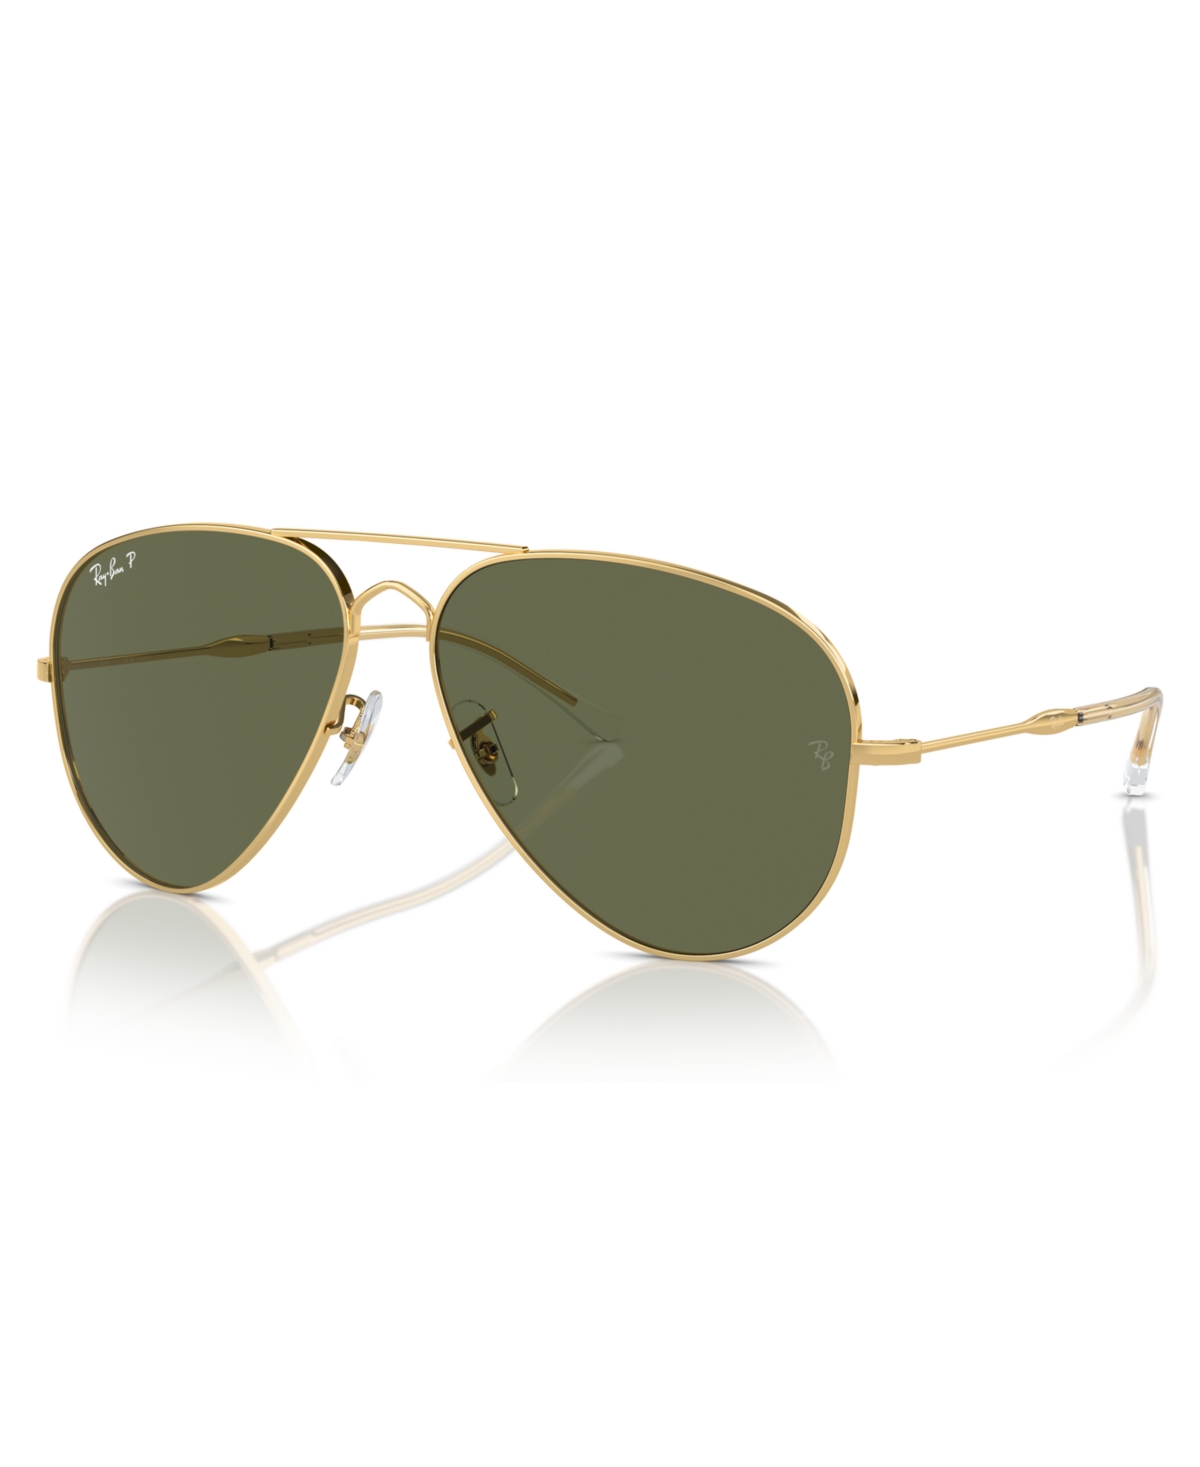 Ray Ban Unisex Polarized Sunglasses, Old Aviator Rb3825 In Gold